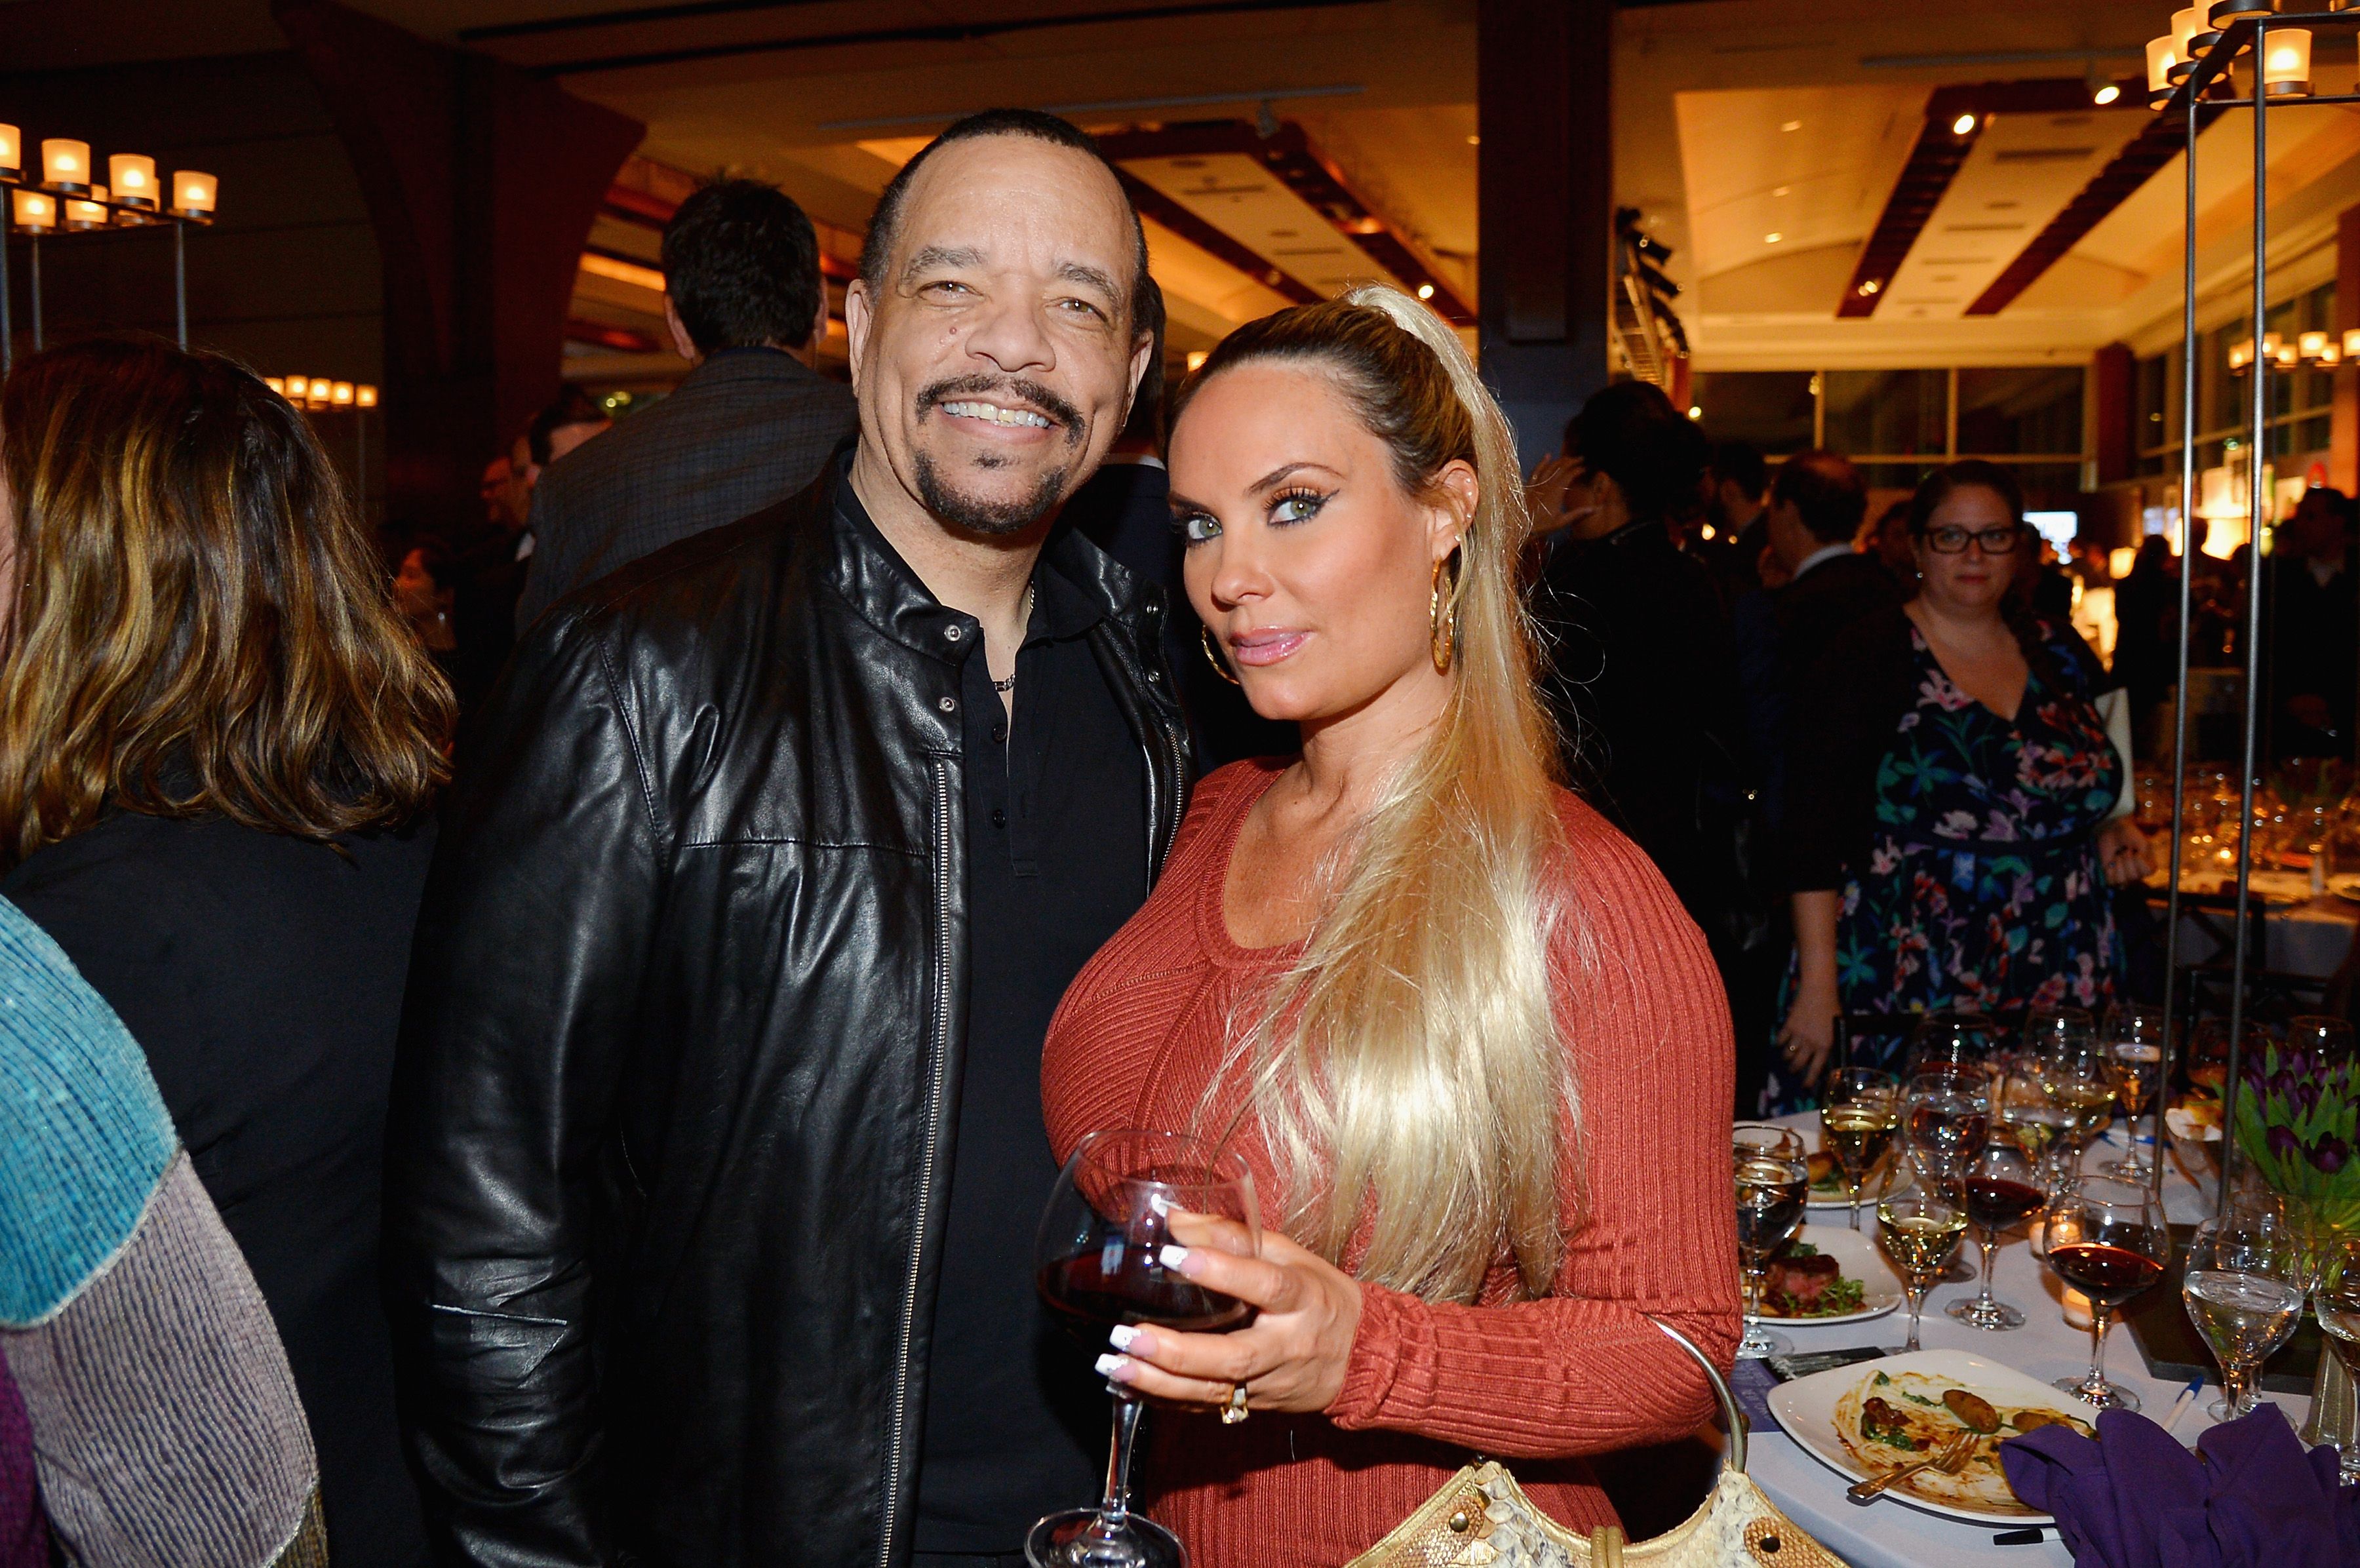 Ice-T and Coco Austin at the Bailey House Gala & Auction event in 2017 in New York City | Source: Getty Images